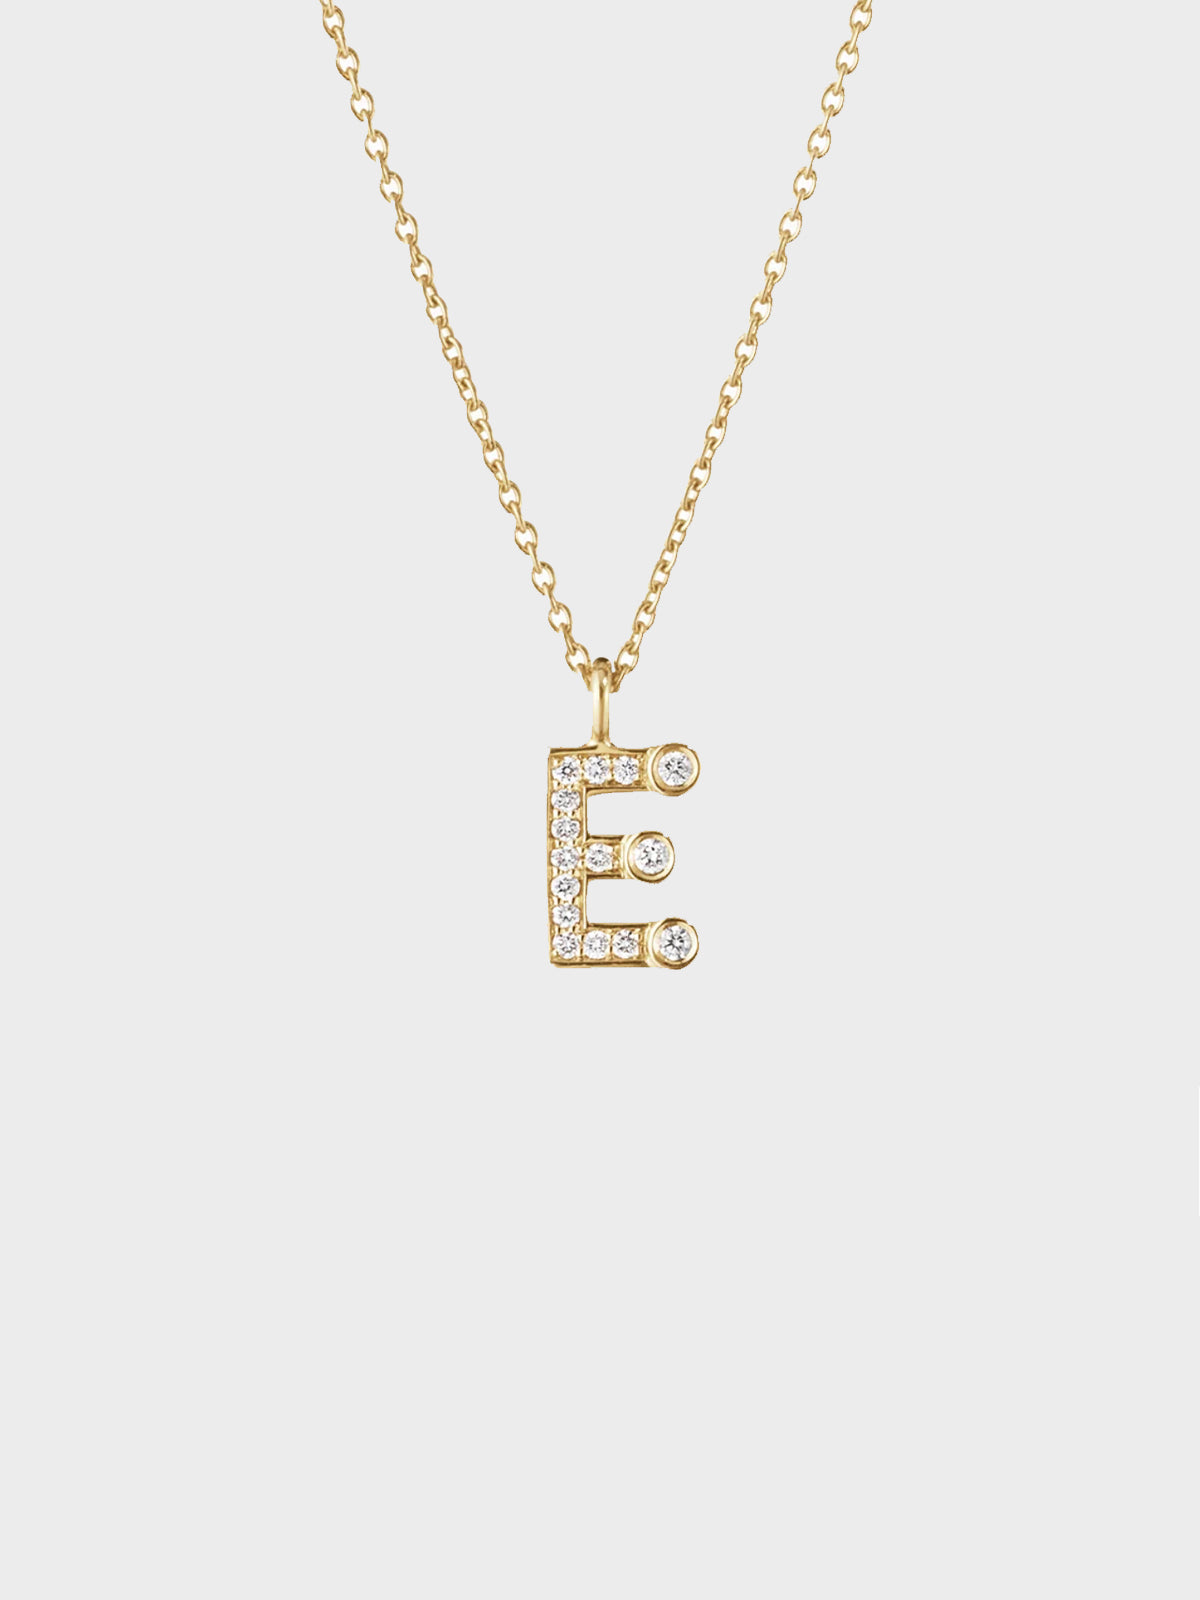 Sophie Bille Brahe - Simple E Necklace in 18K Yellow Gold